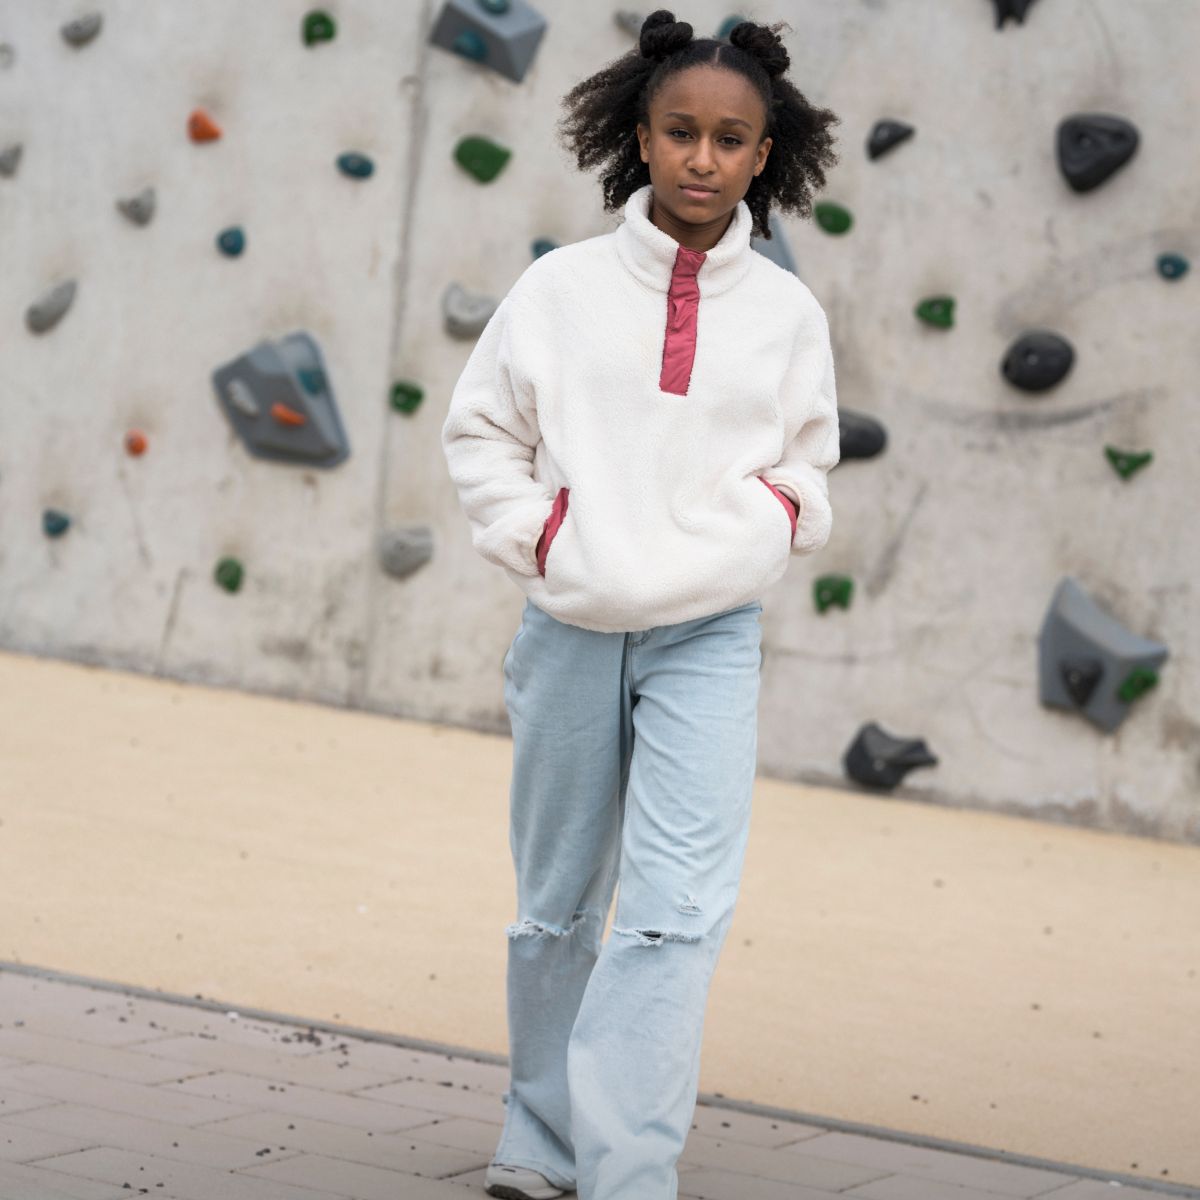 Girl in front of climbing wall